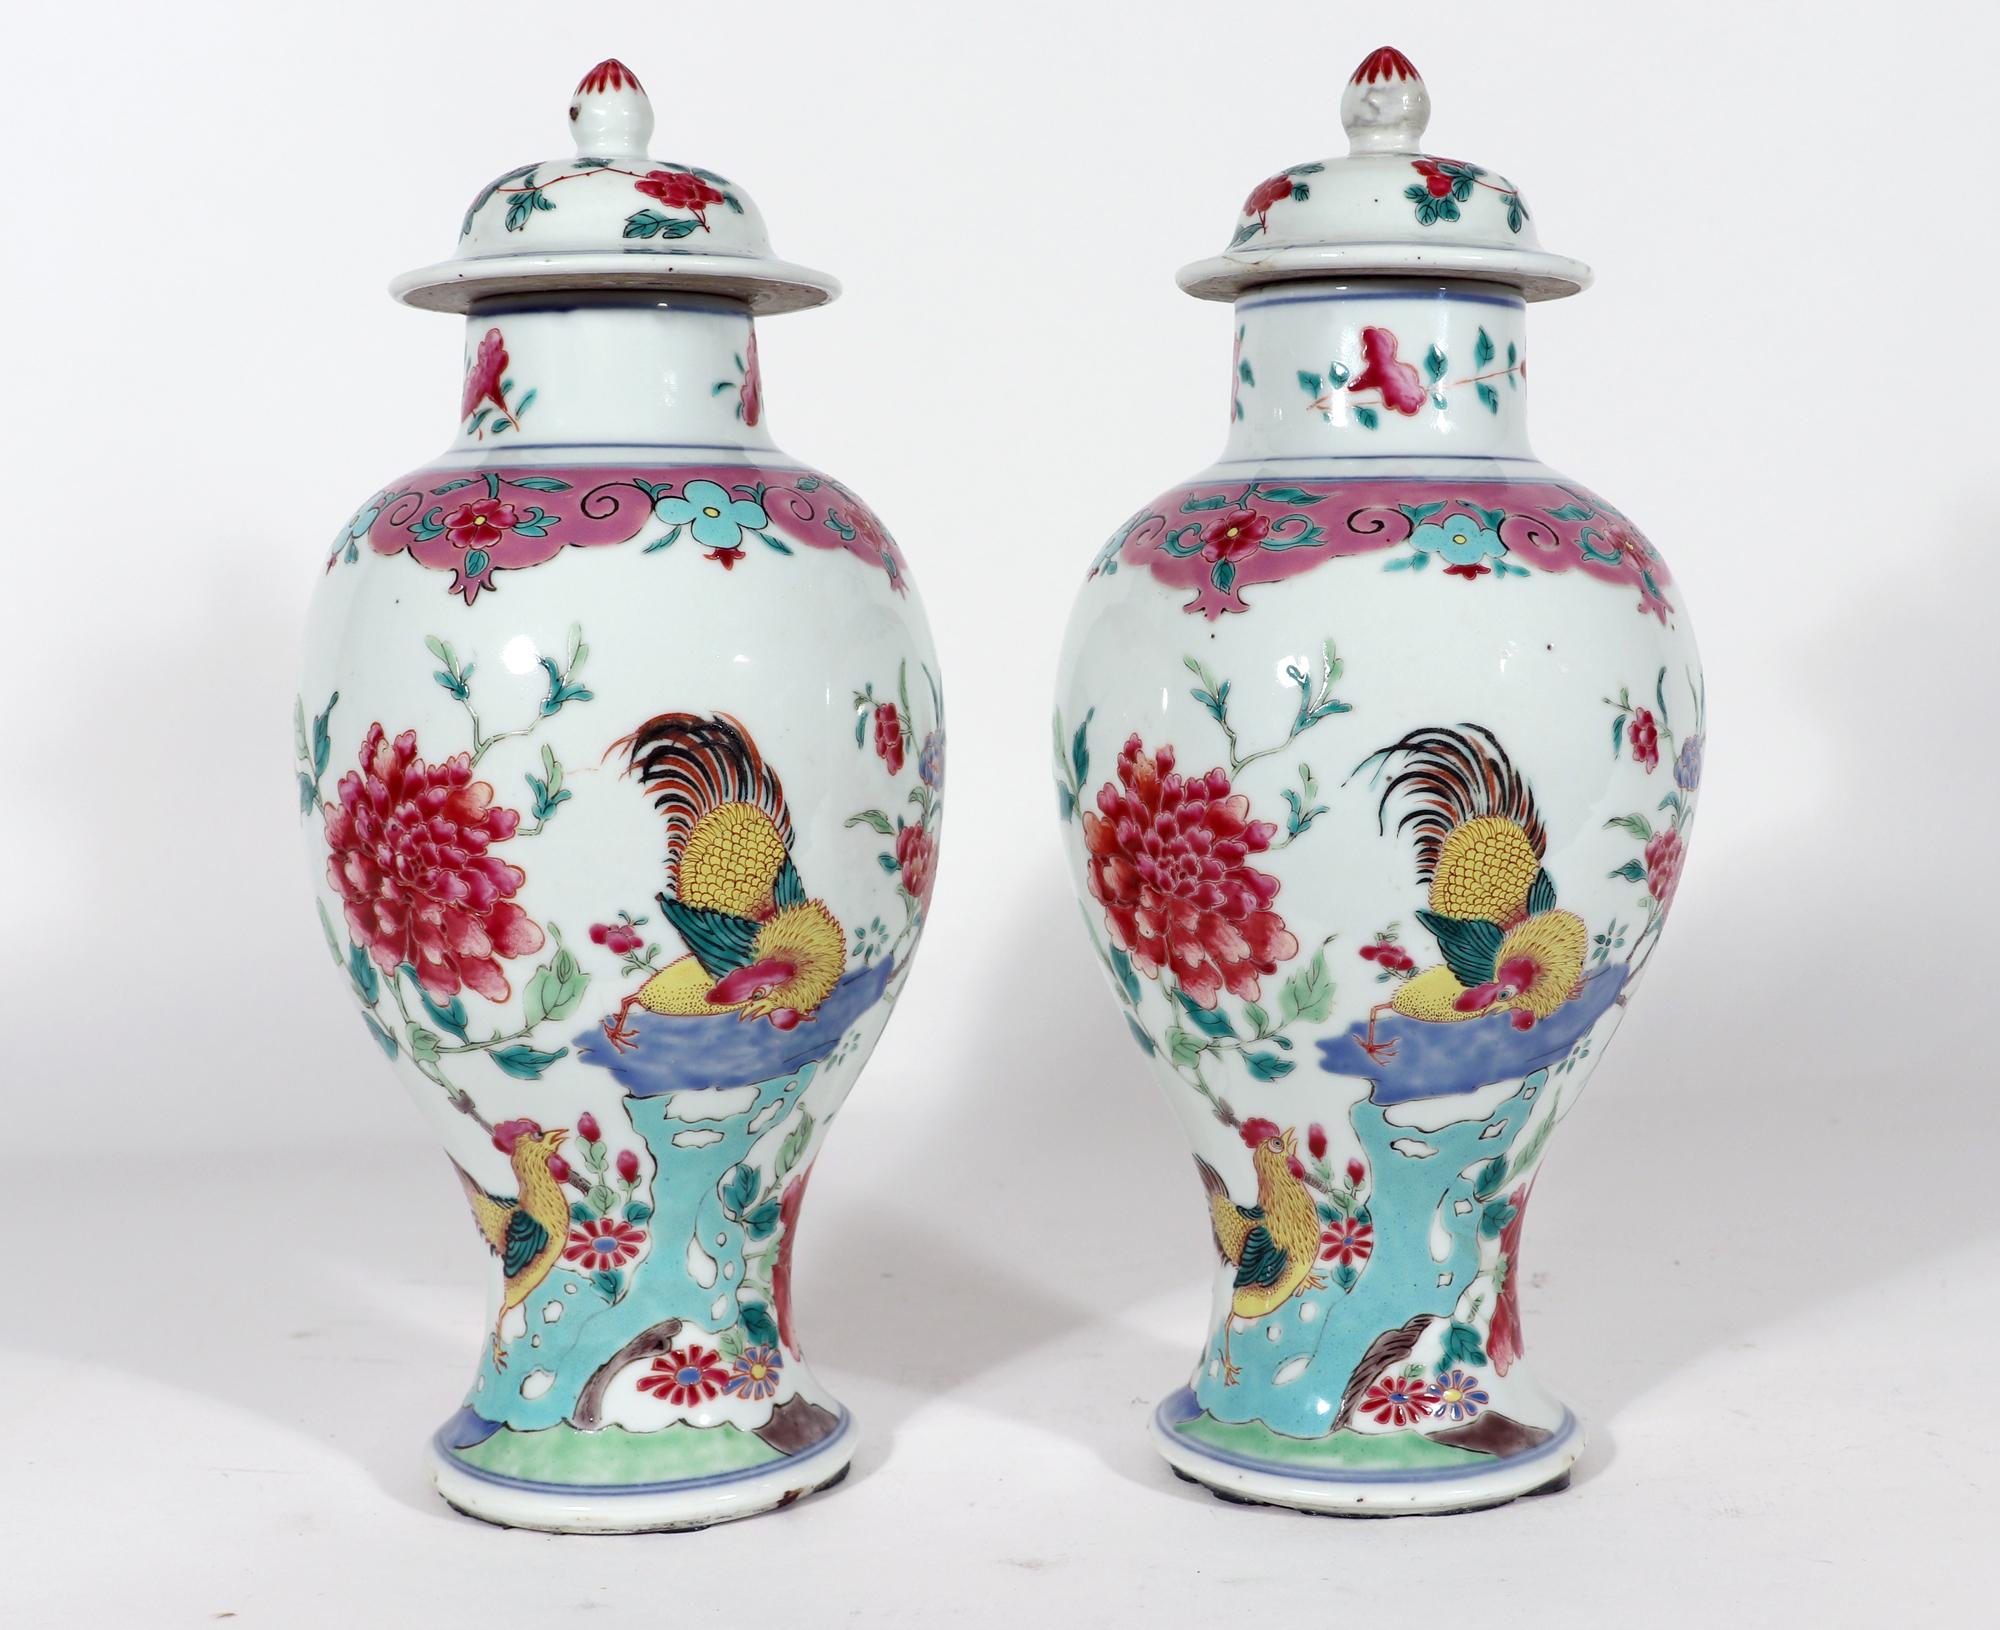 Mid-18th Century Chinese Export Porcelain Baluster Famille Rose Vases With Cockerels